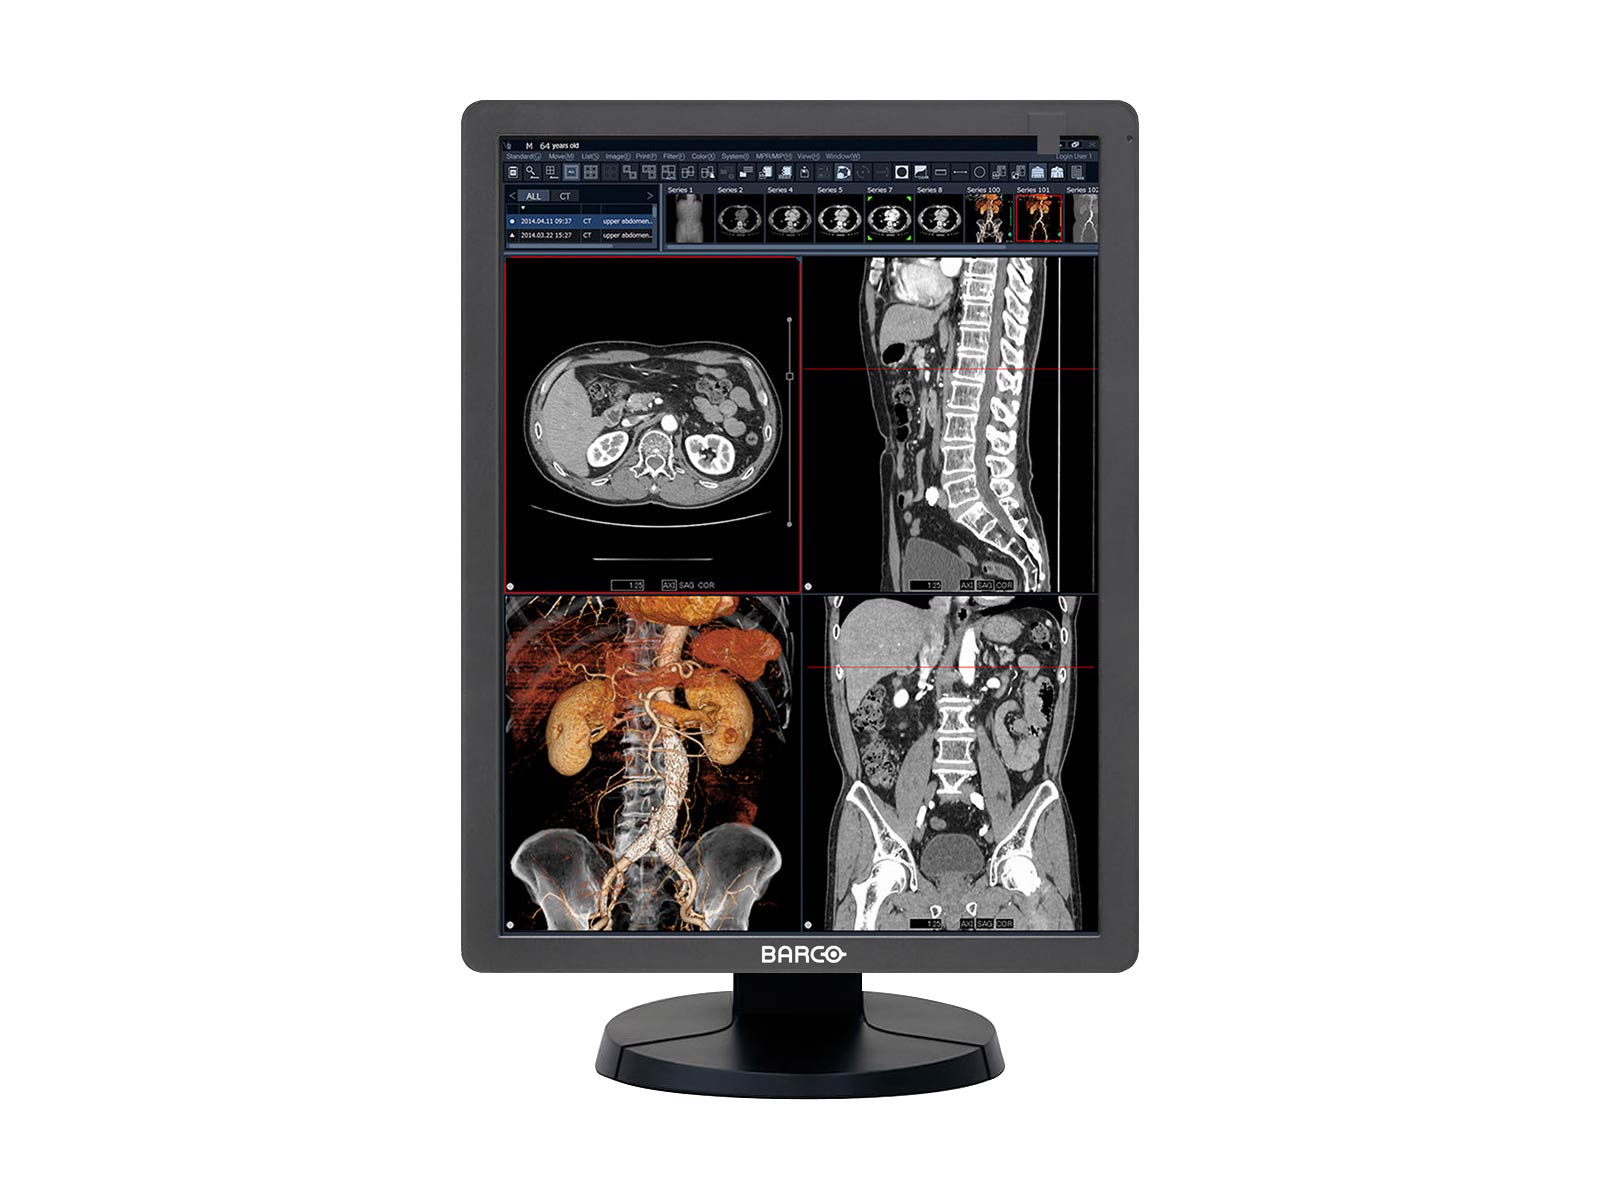 Barco Eonis MDRC-2321 2MP 21" SNIB HLX Color Clinical Review Display (K9350315)